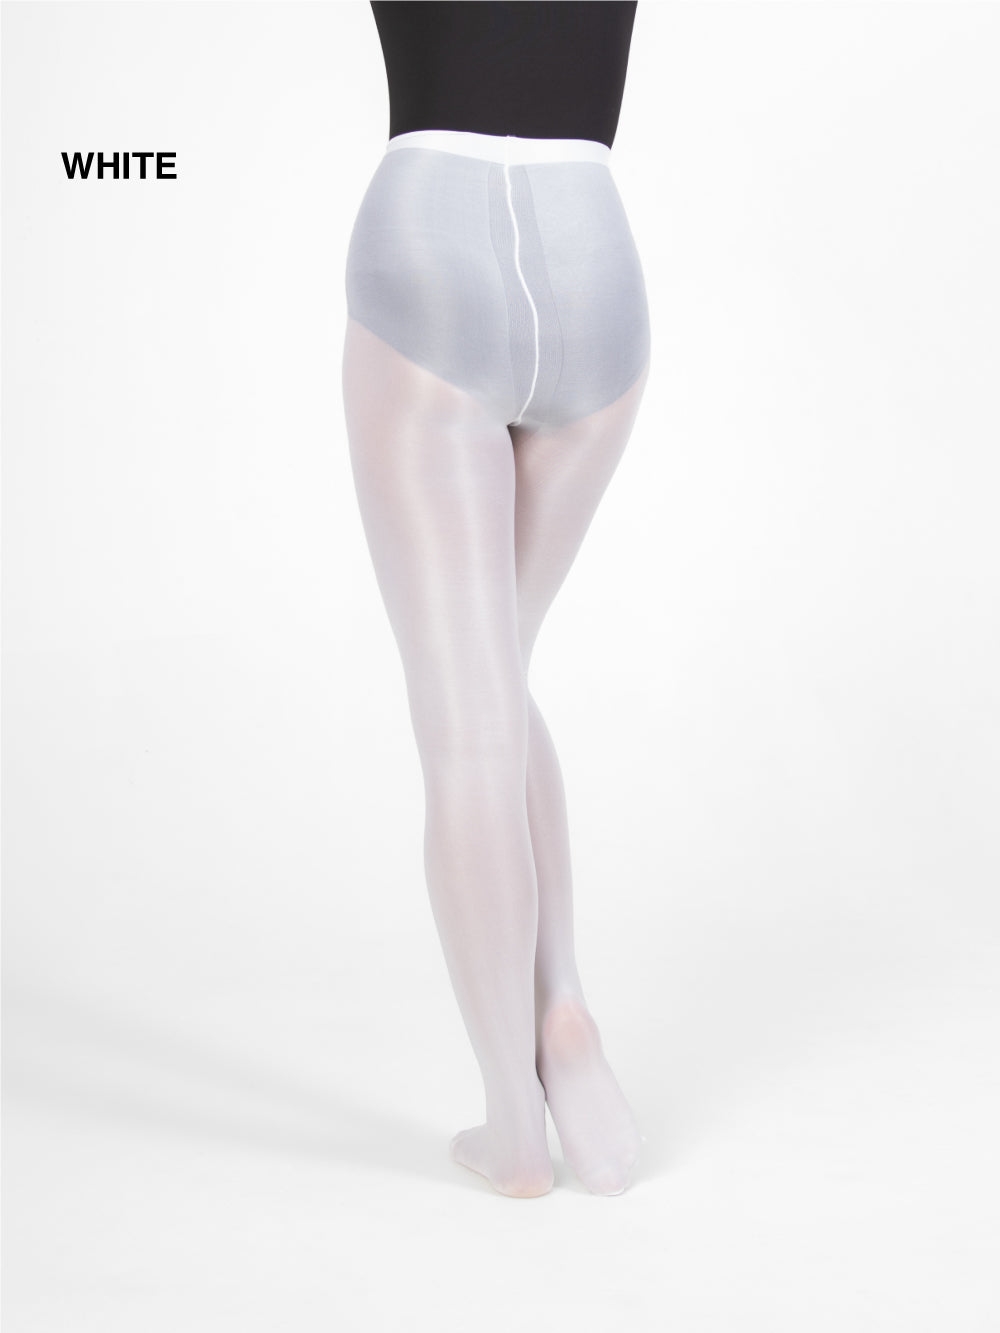 TotalSTRETCH Seamless Footless Tights